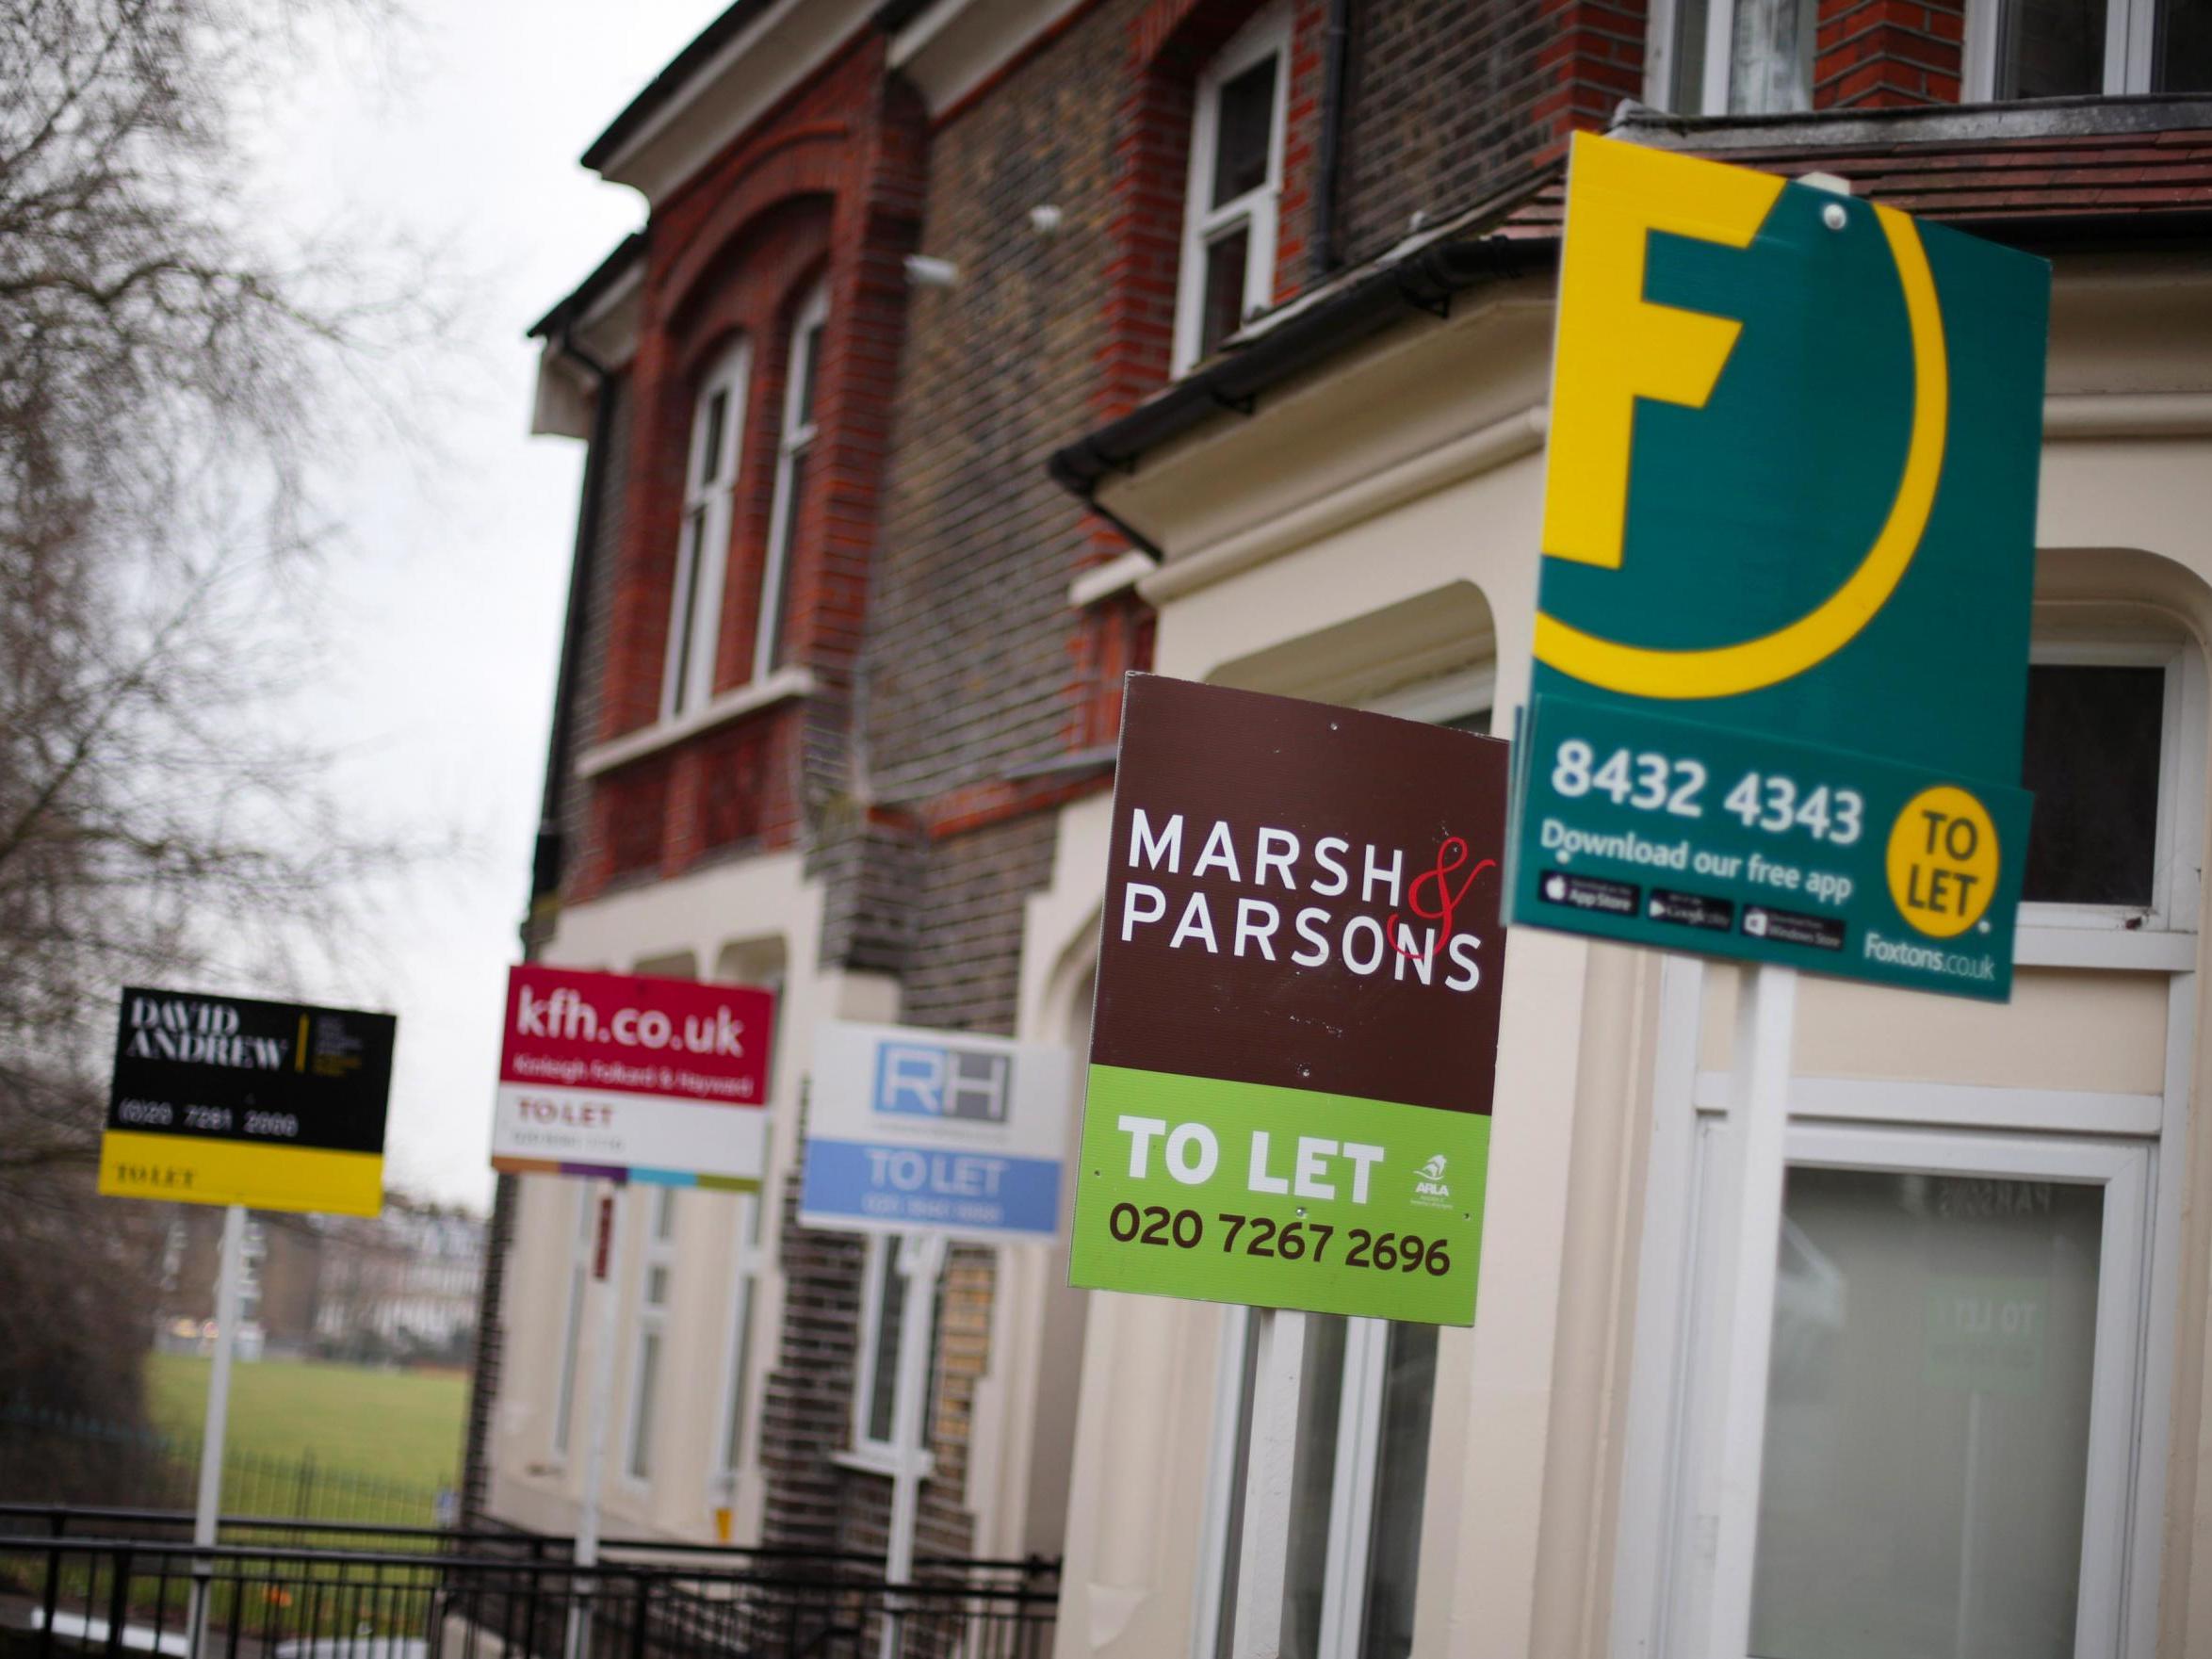 The Right to Rent scheme requires private landlords to check the immigration status of potential tenants